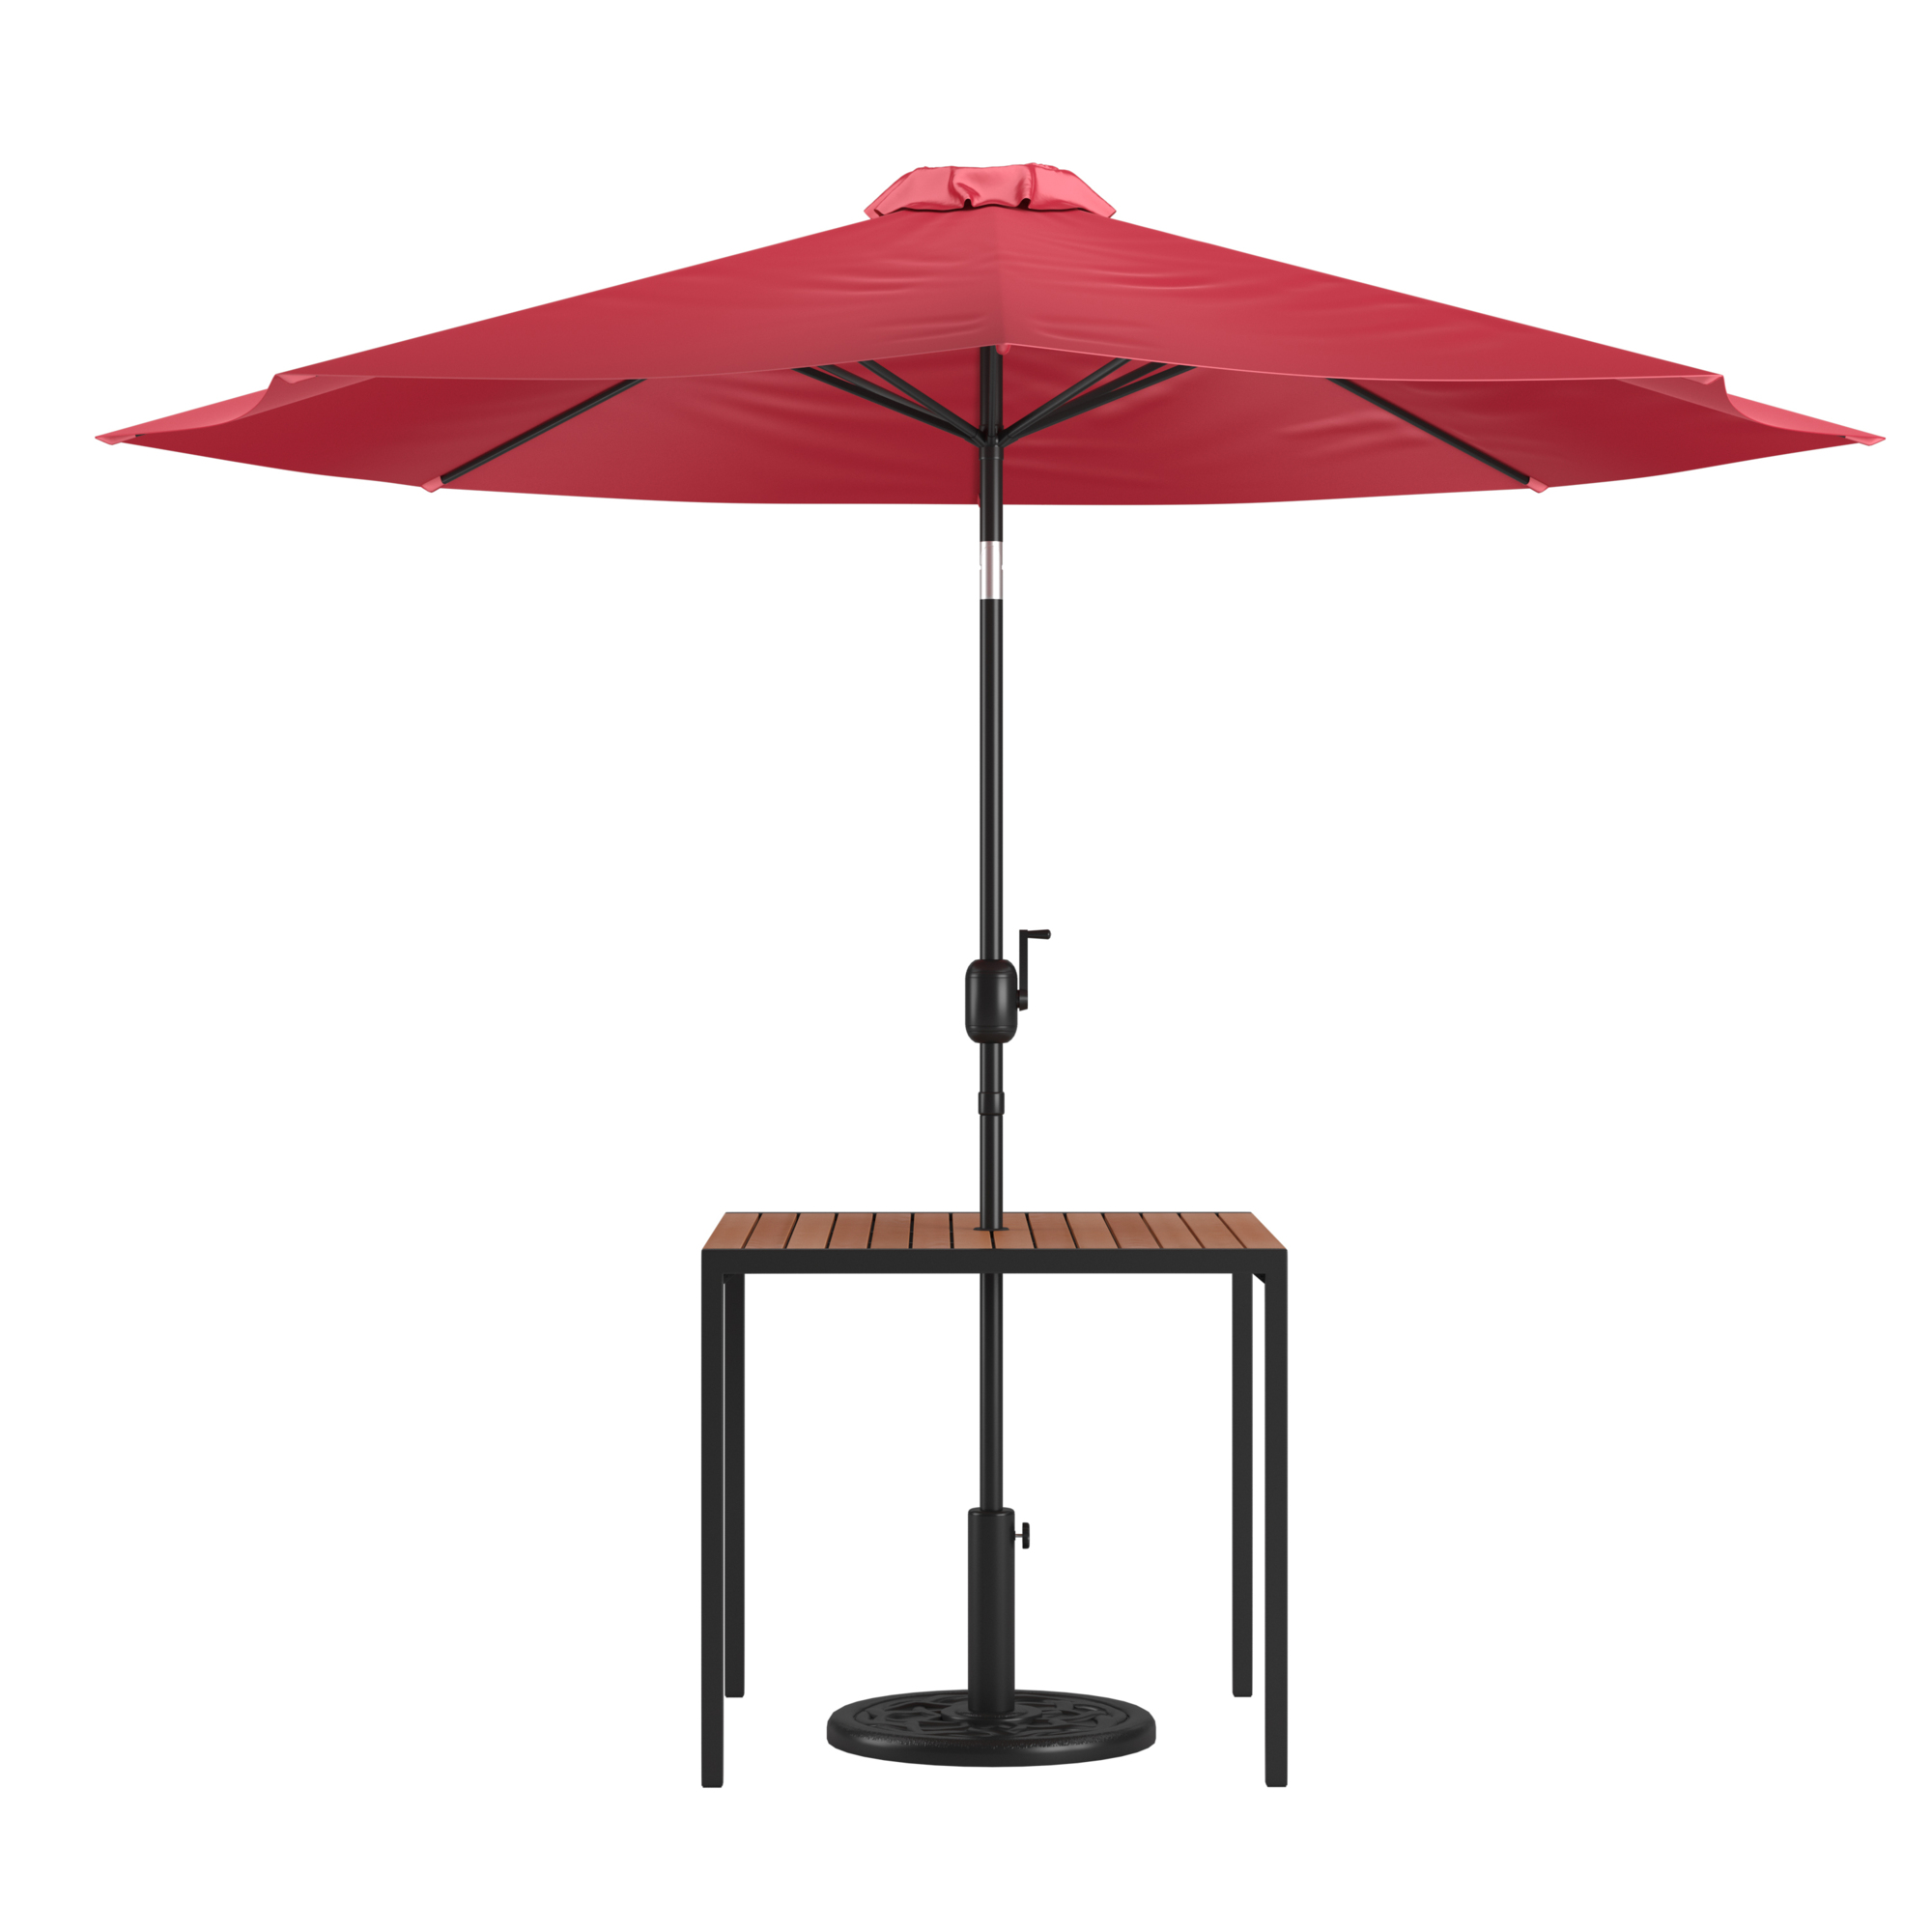 Flash Furniture, Faux Teak 35Inch Patio Table-Red Umbrella Base, Table Shape Square, Primary Color Red, Height 29.5 in, Model XU8100UB19BRD